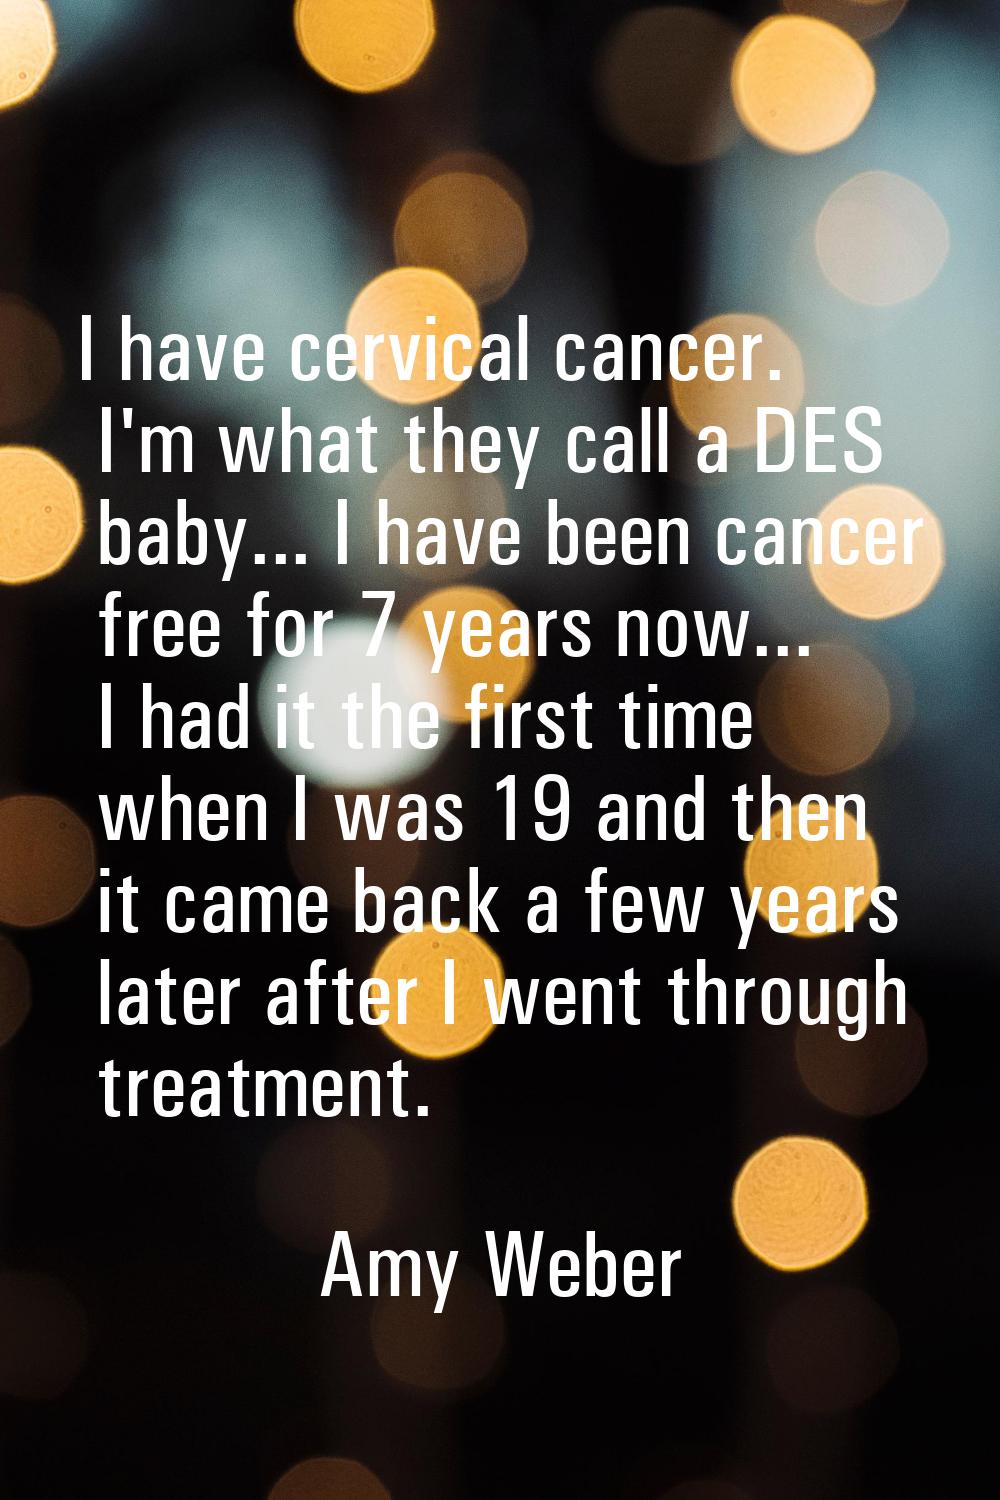 I have cervical cancer. I'm what they call a DES baby... I have been cancer free for 7 years now...